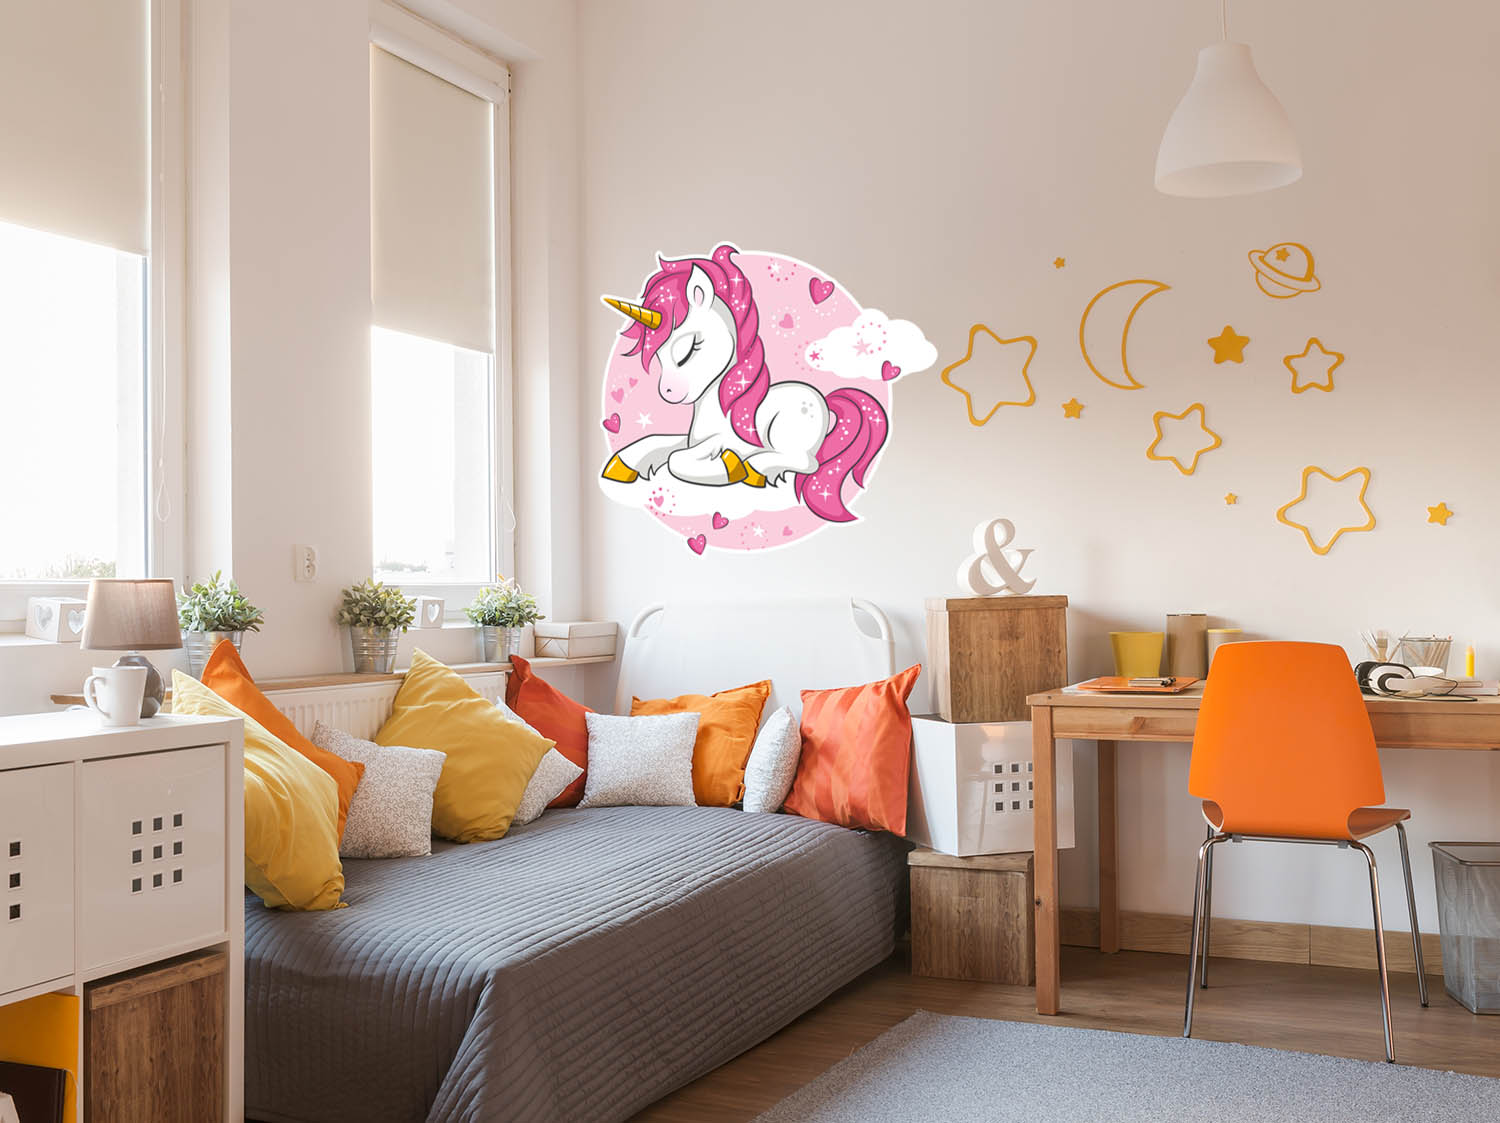 Pink Unicorn in a Cloud, Wall Decal Sticker, Removable with NO wall Damage!